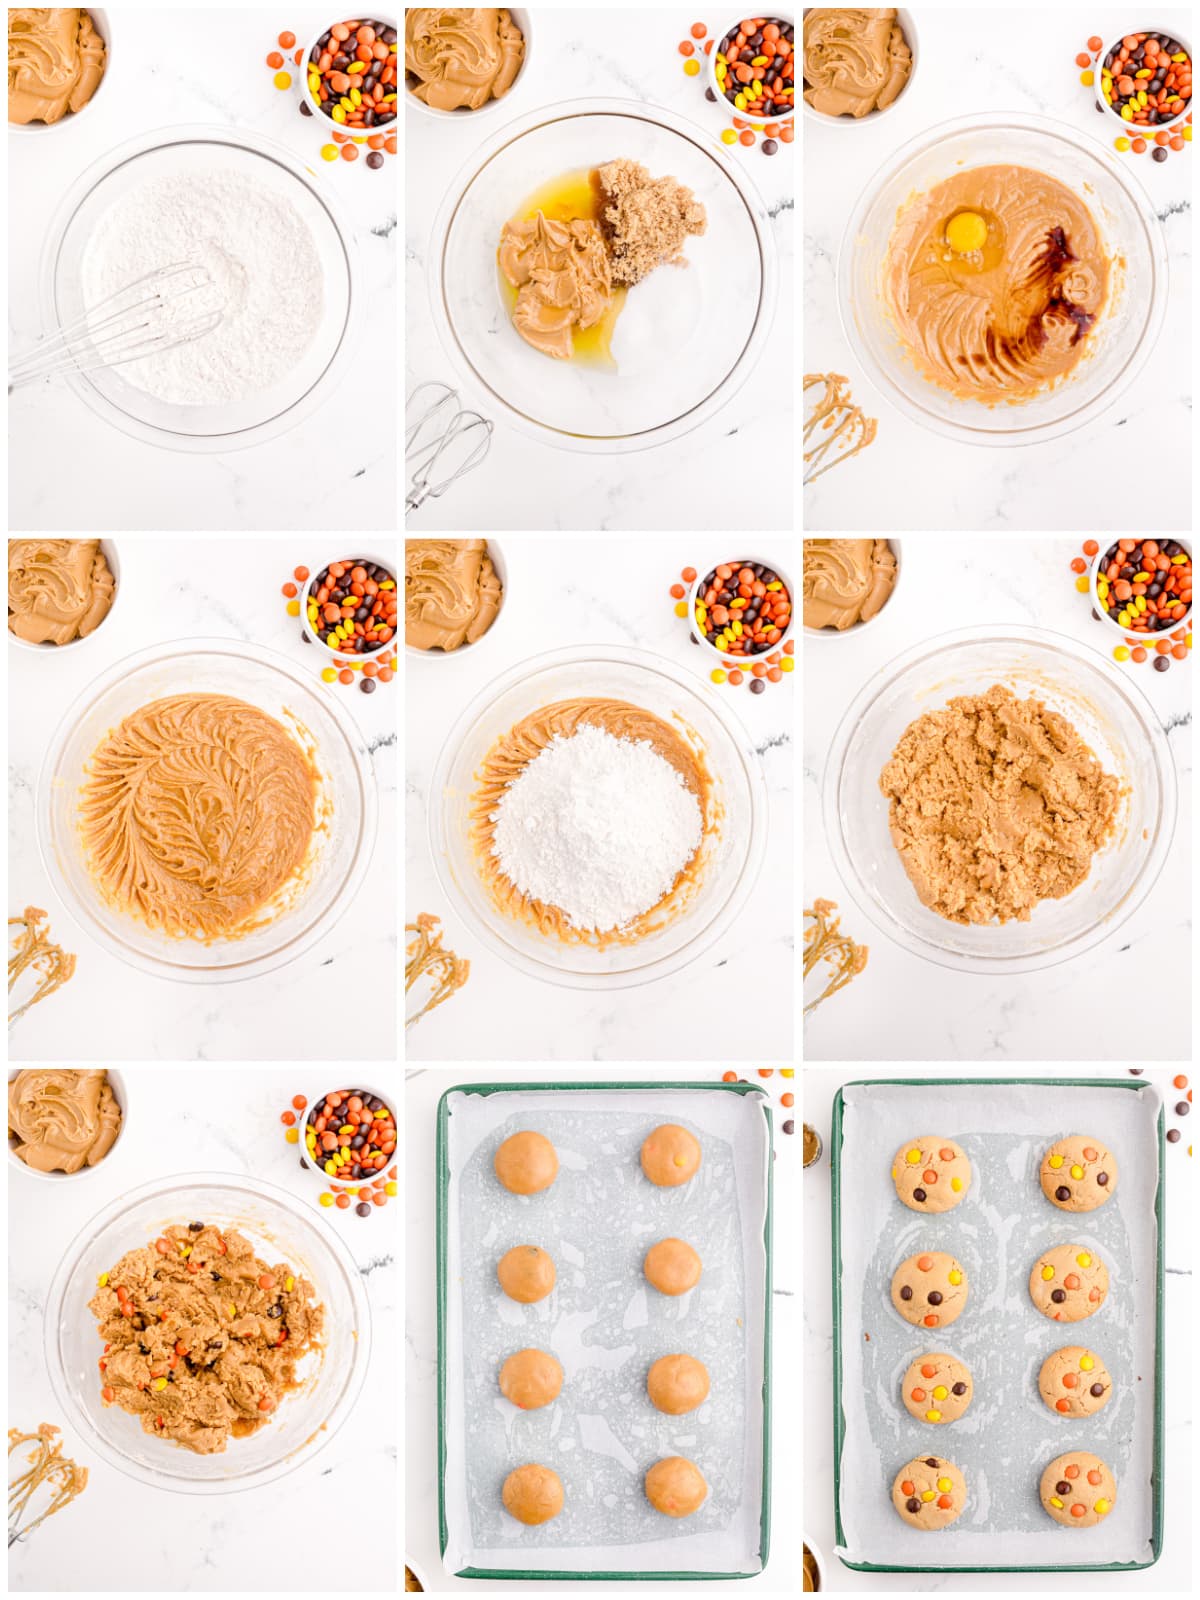 Step by step photos on how to make Reese's Peanut Butter Cookies.